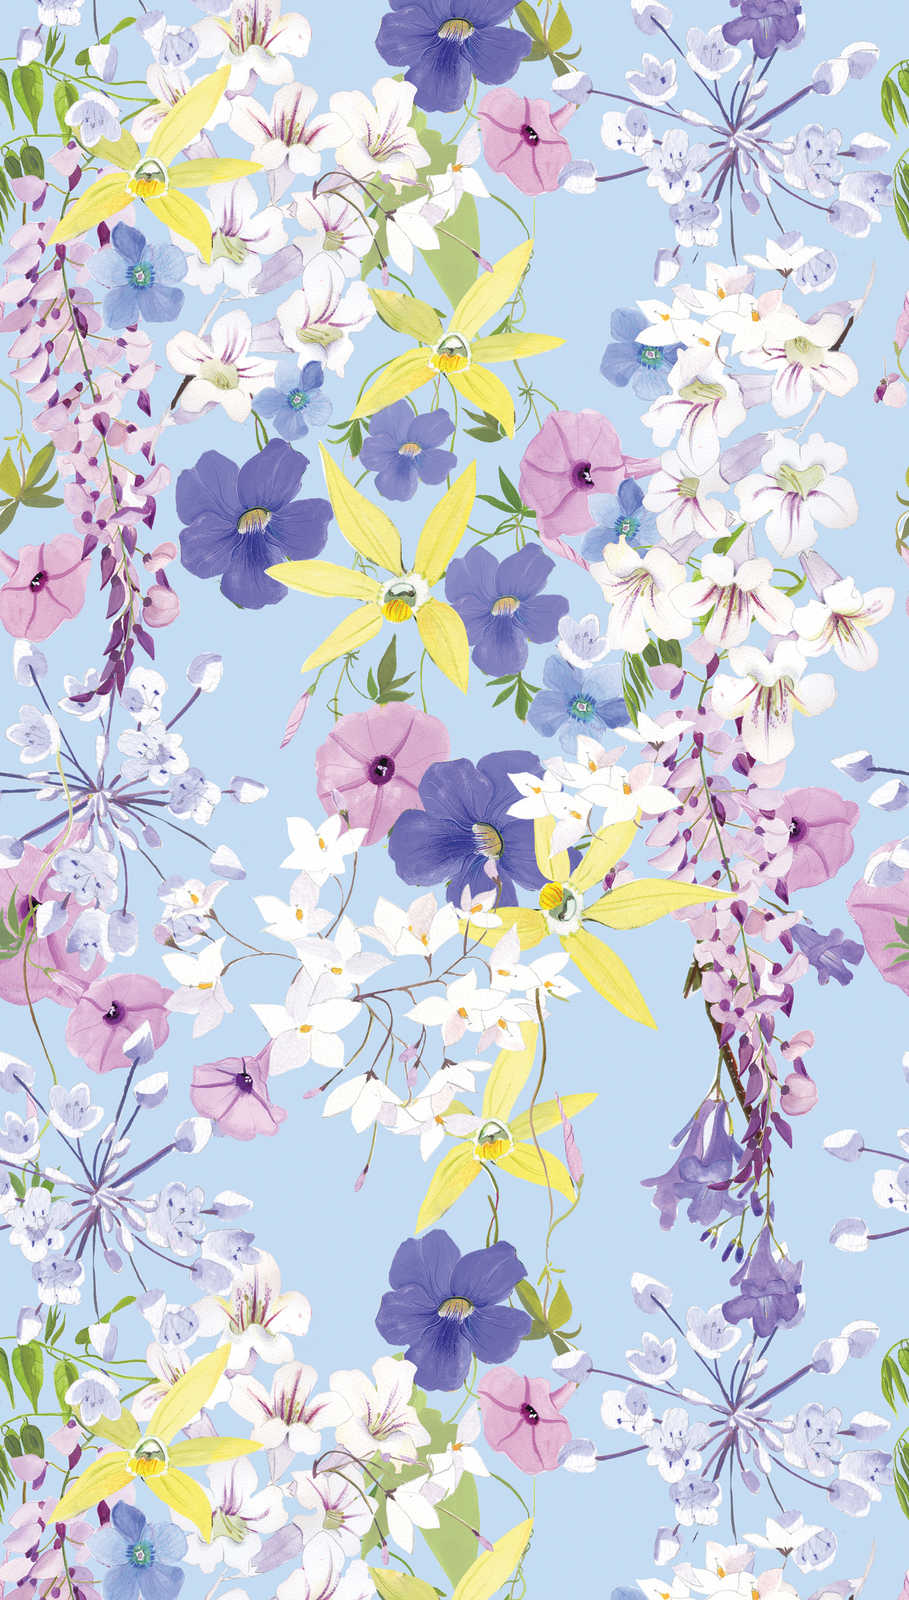             Flower motif wallpaper in cool colours - multicoloured, lilac, yellow
        